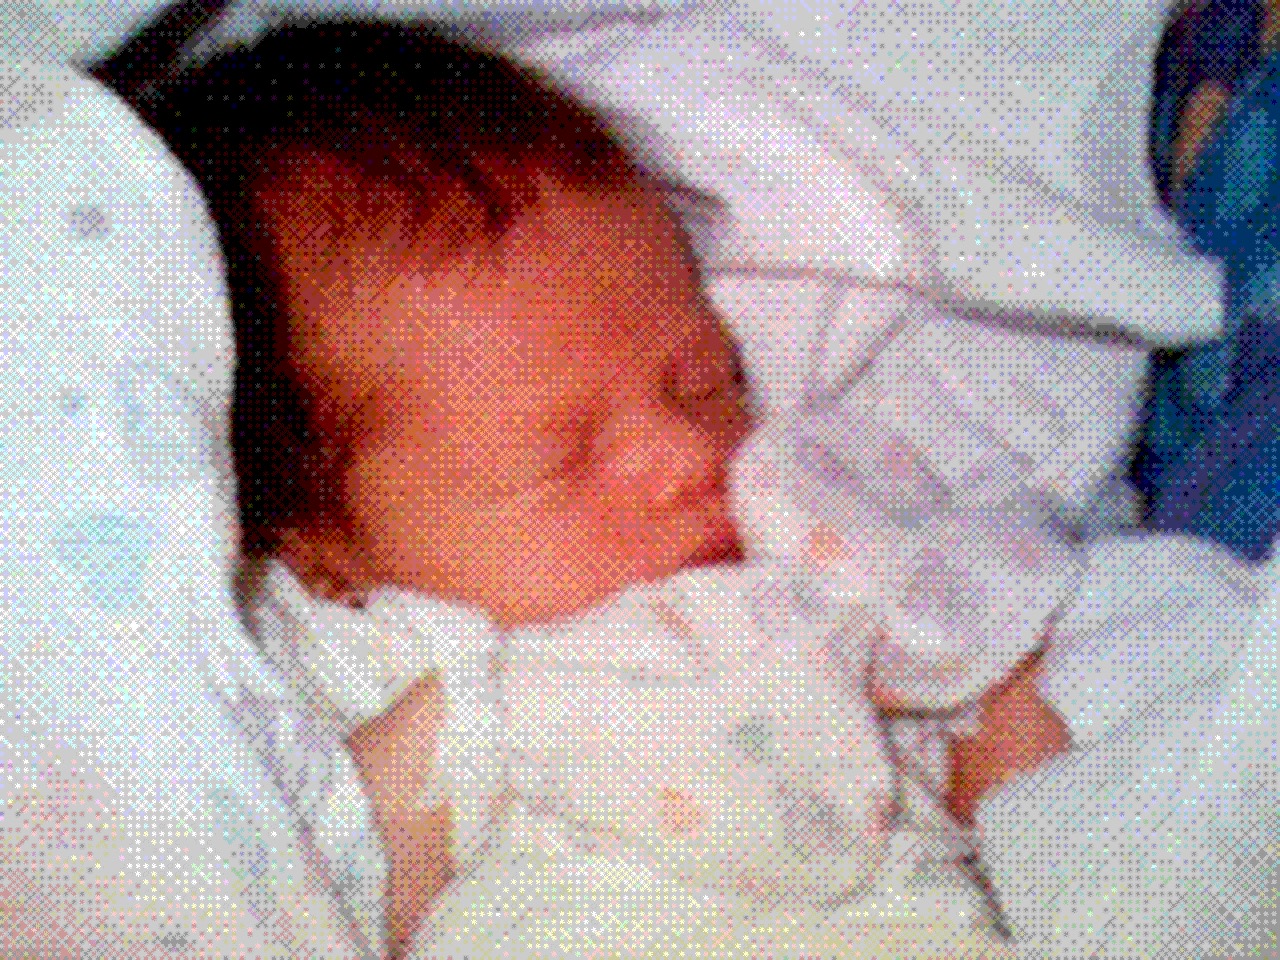 Philippe Kahn's first camera phone picture of daughter, Sophie Kahn